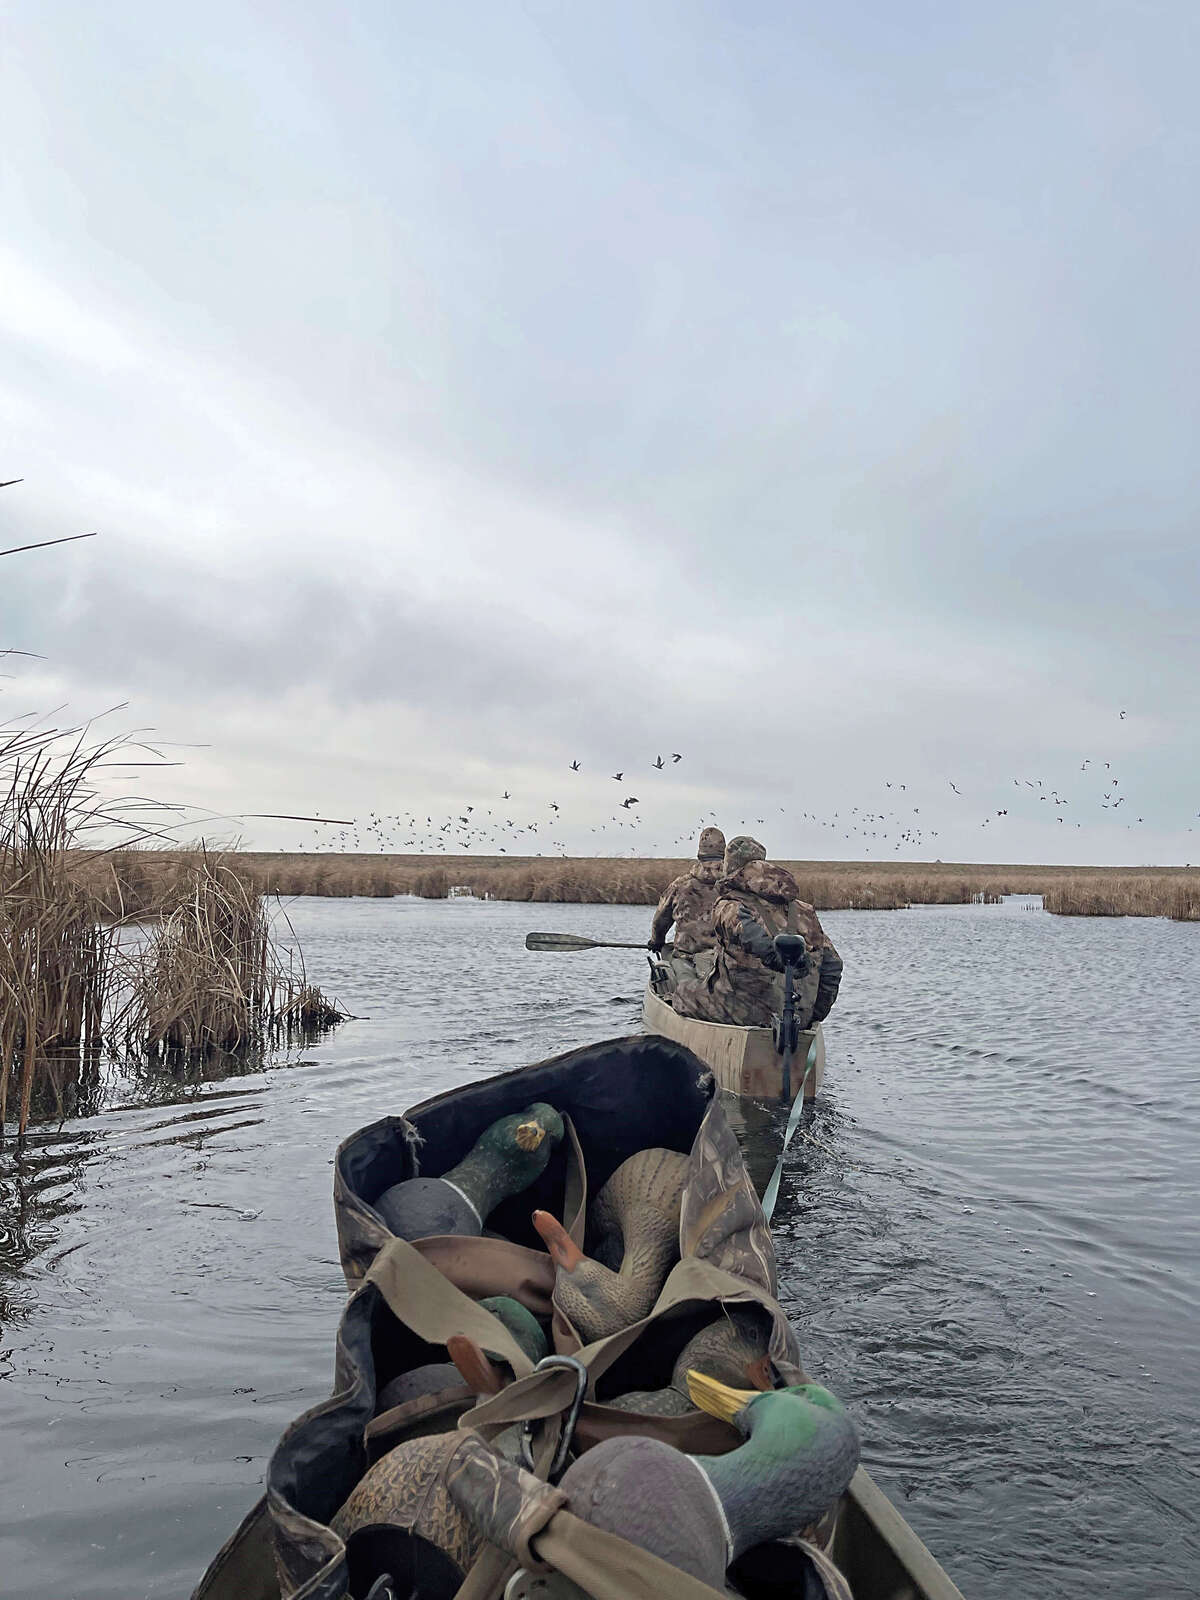 Duck hunters in marsh on a boat with a flock of waterfowl in the distance. Photo by Anthony Scardigli